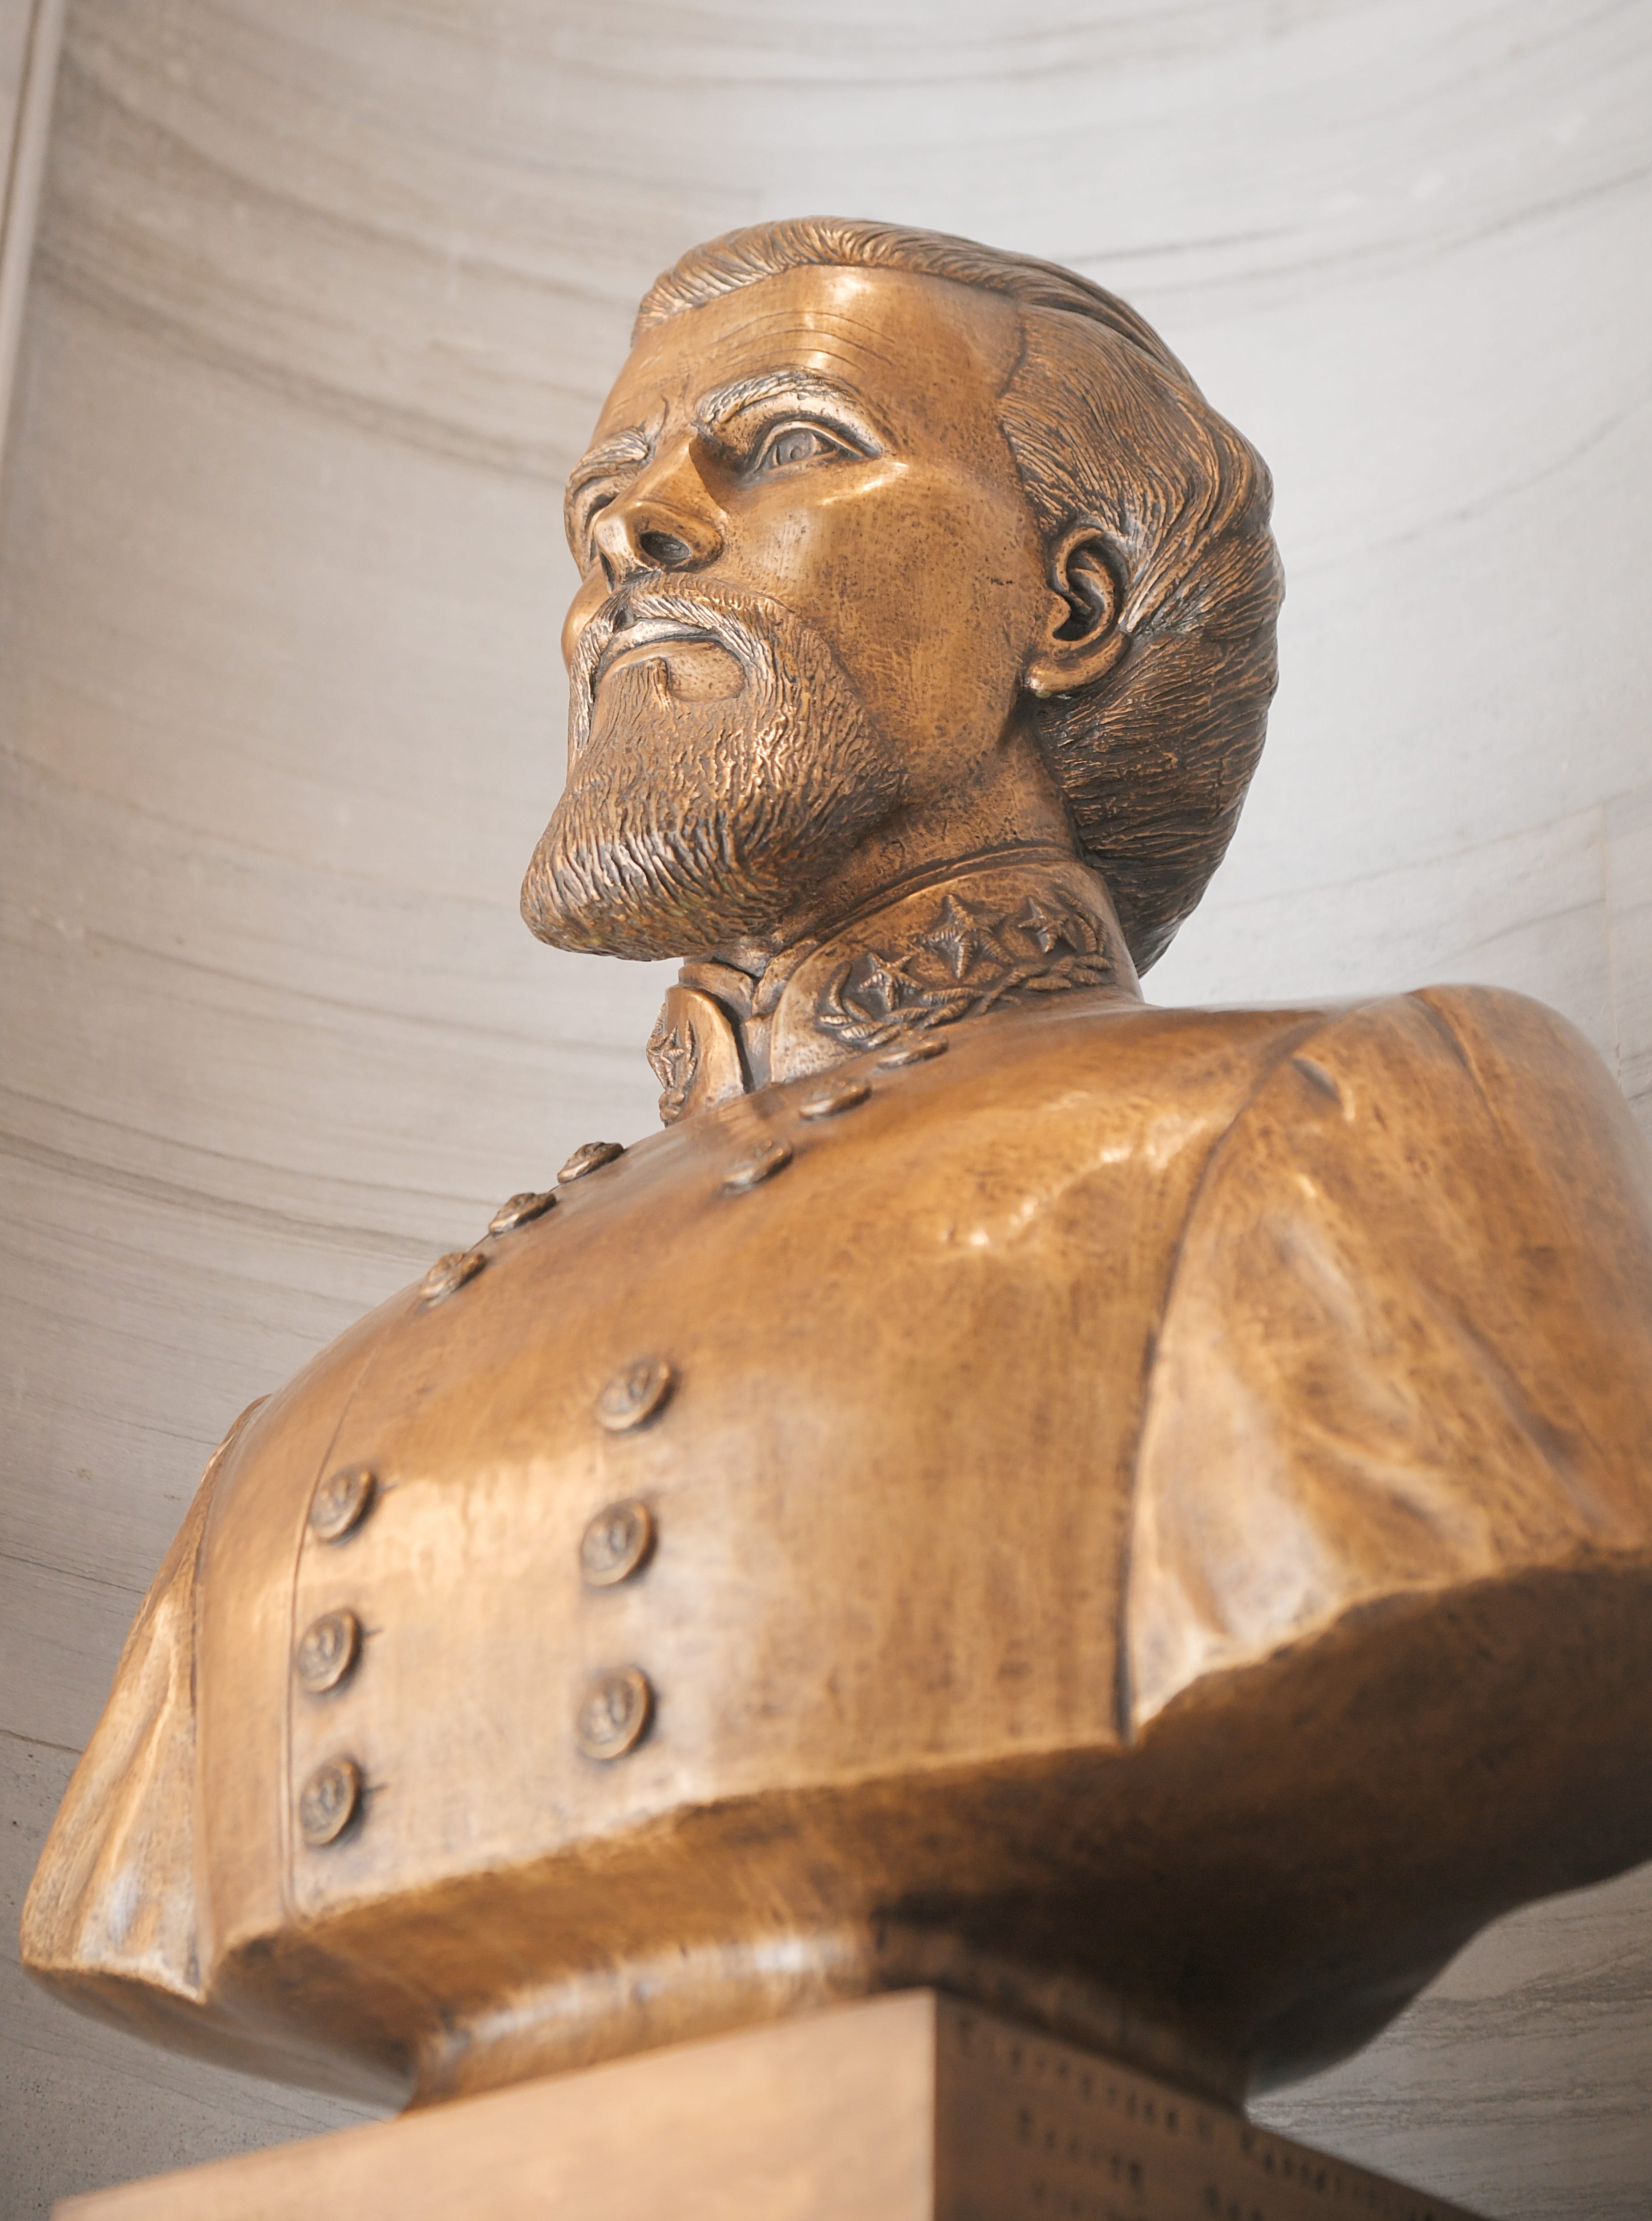 Gov Lee Calls For Nathan Bedford Forrest Bust To Be Moved To Museum